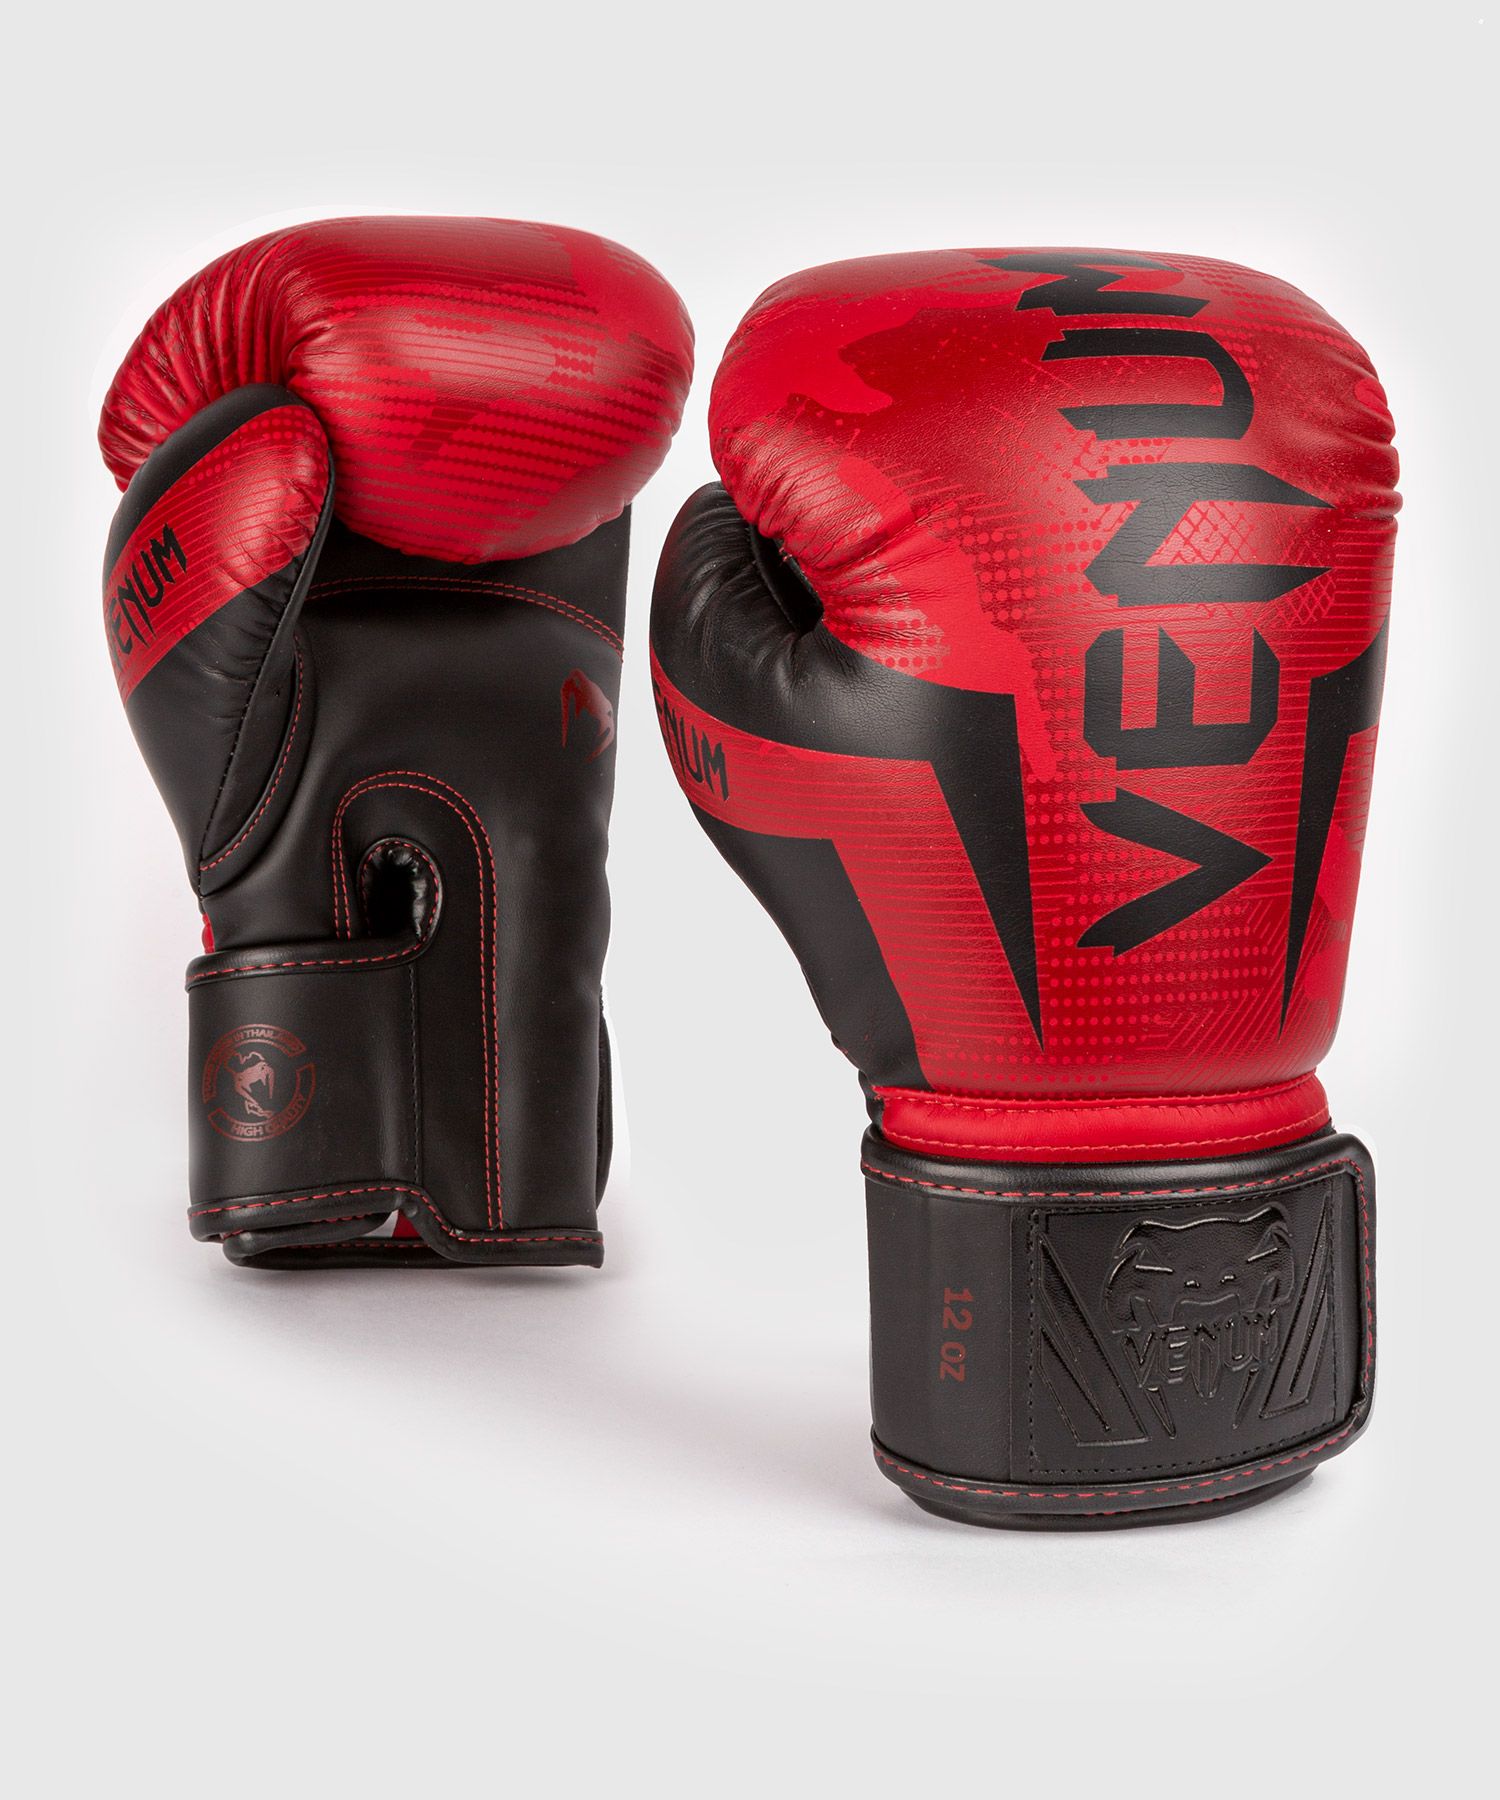 Red or Black Brand New  Boxing gloves 